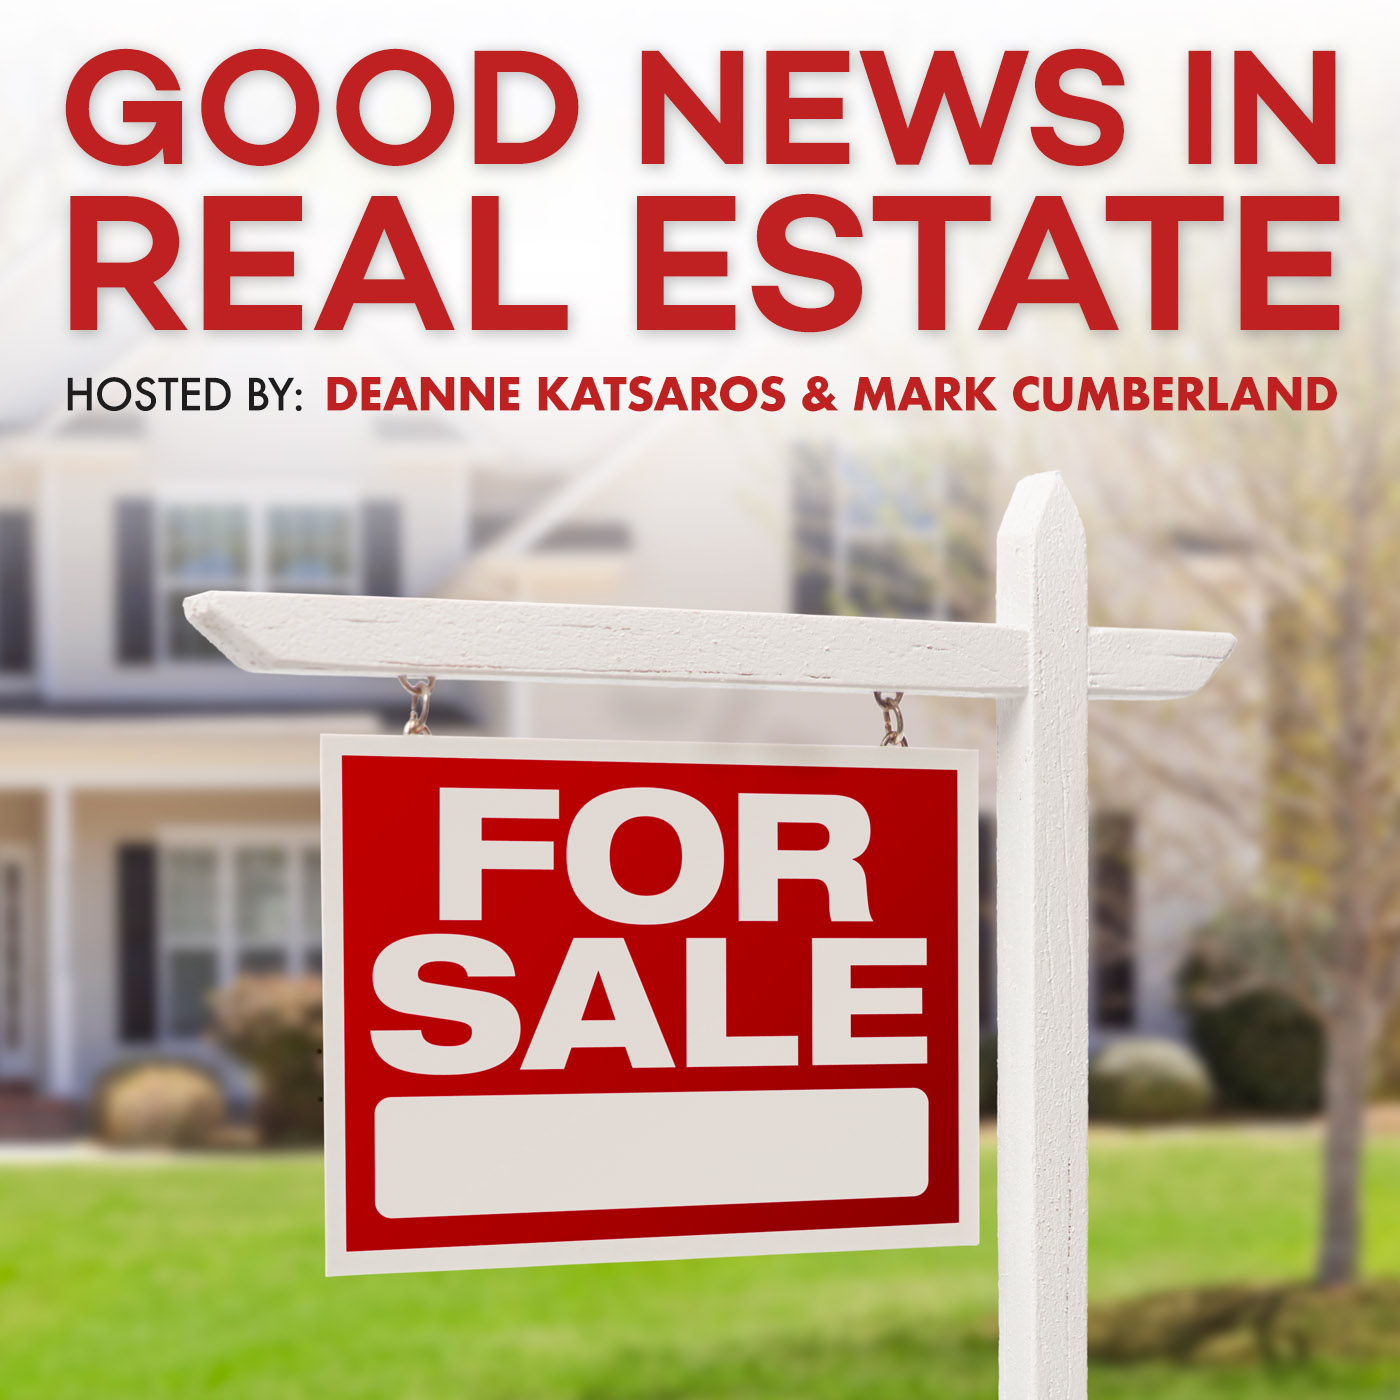 October 8, 2022 | Good News In Real Estate